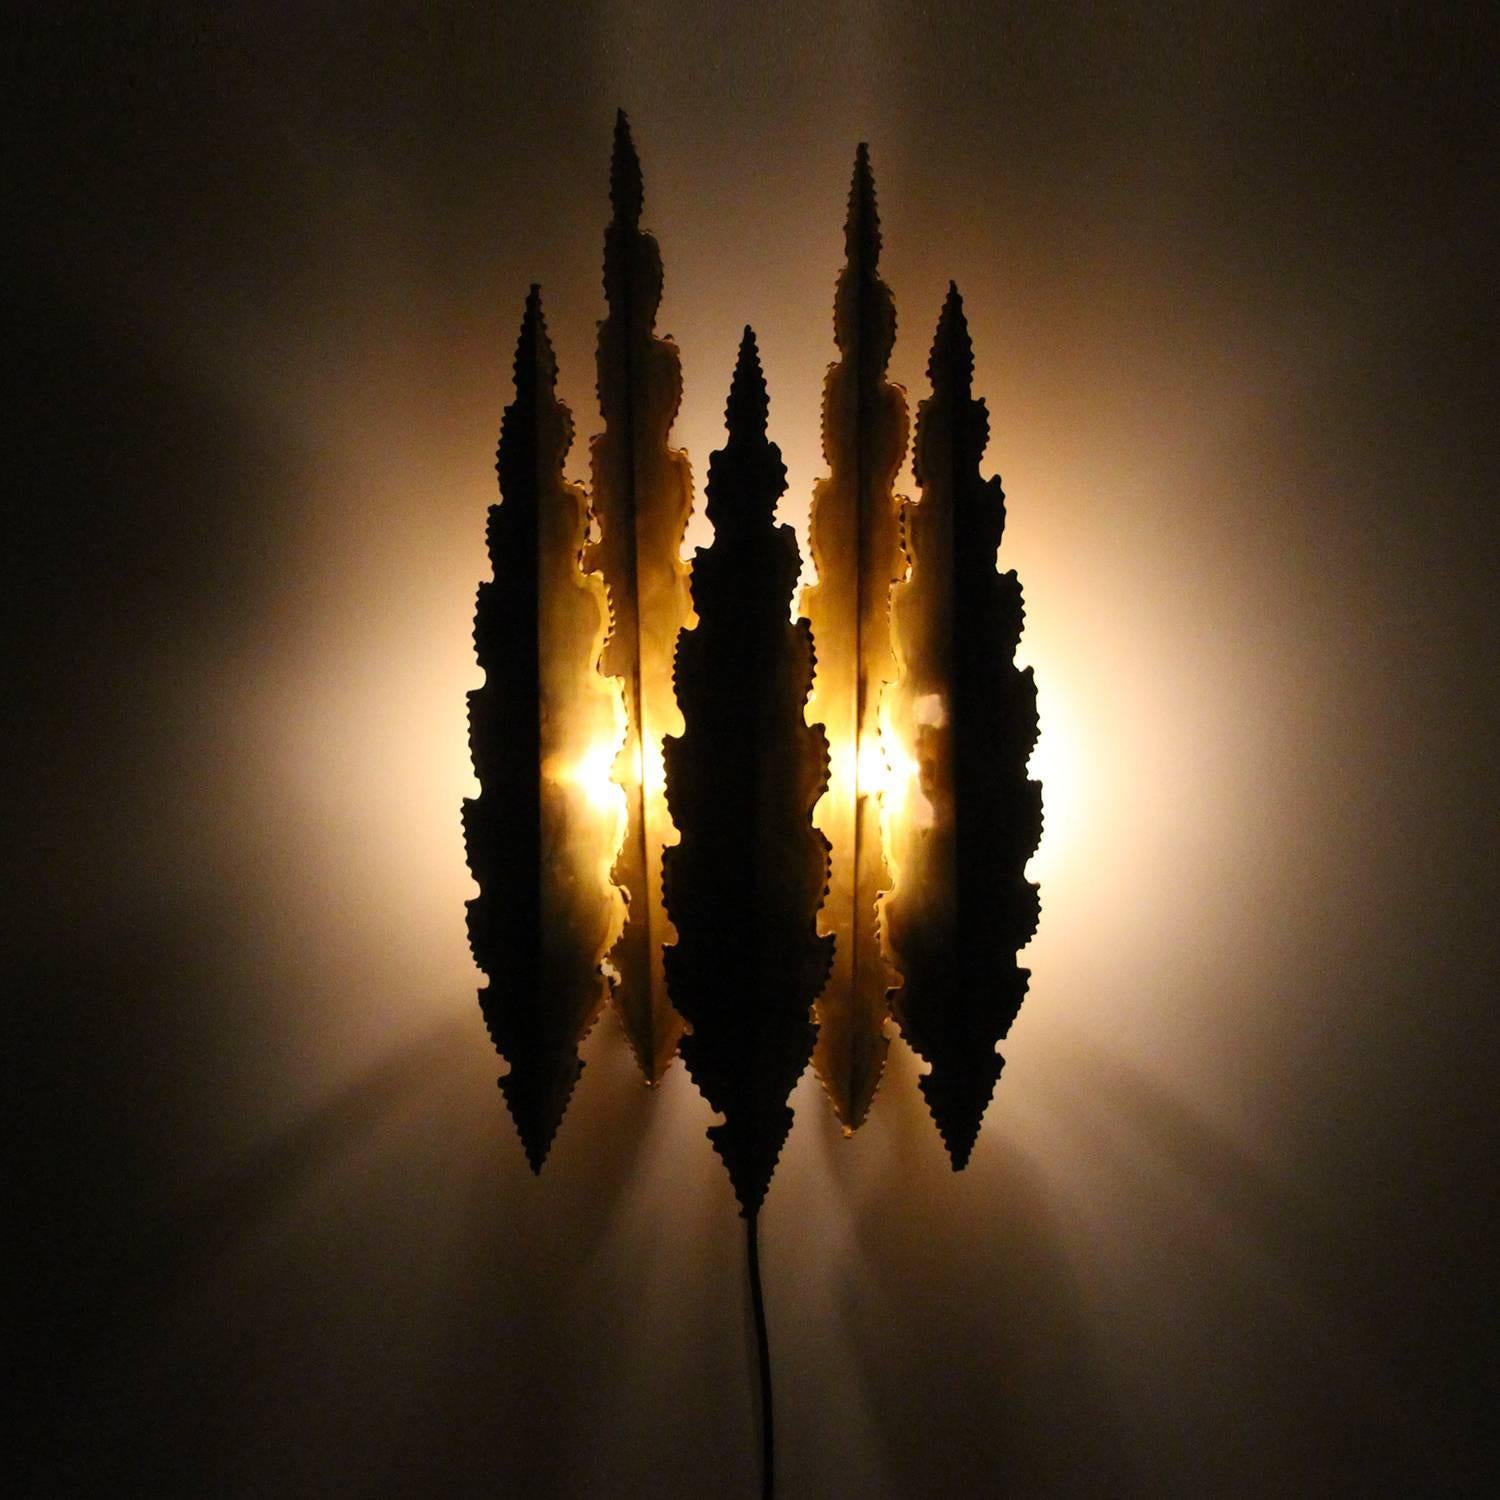 Type 5195, large brass wall sconce from the 1960s by Svend Aage Holm Sorensen, rare large Brutalist style wall light in excellent vintage condition.

A beautiful large wall light comprised of five serrated and flame-treated brass pieces, each